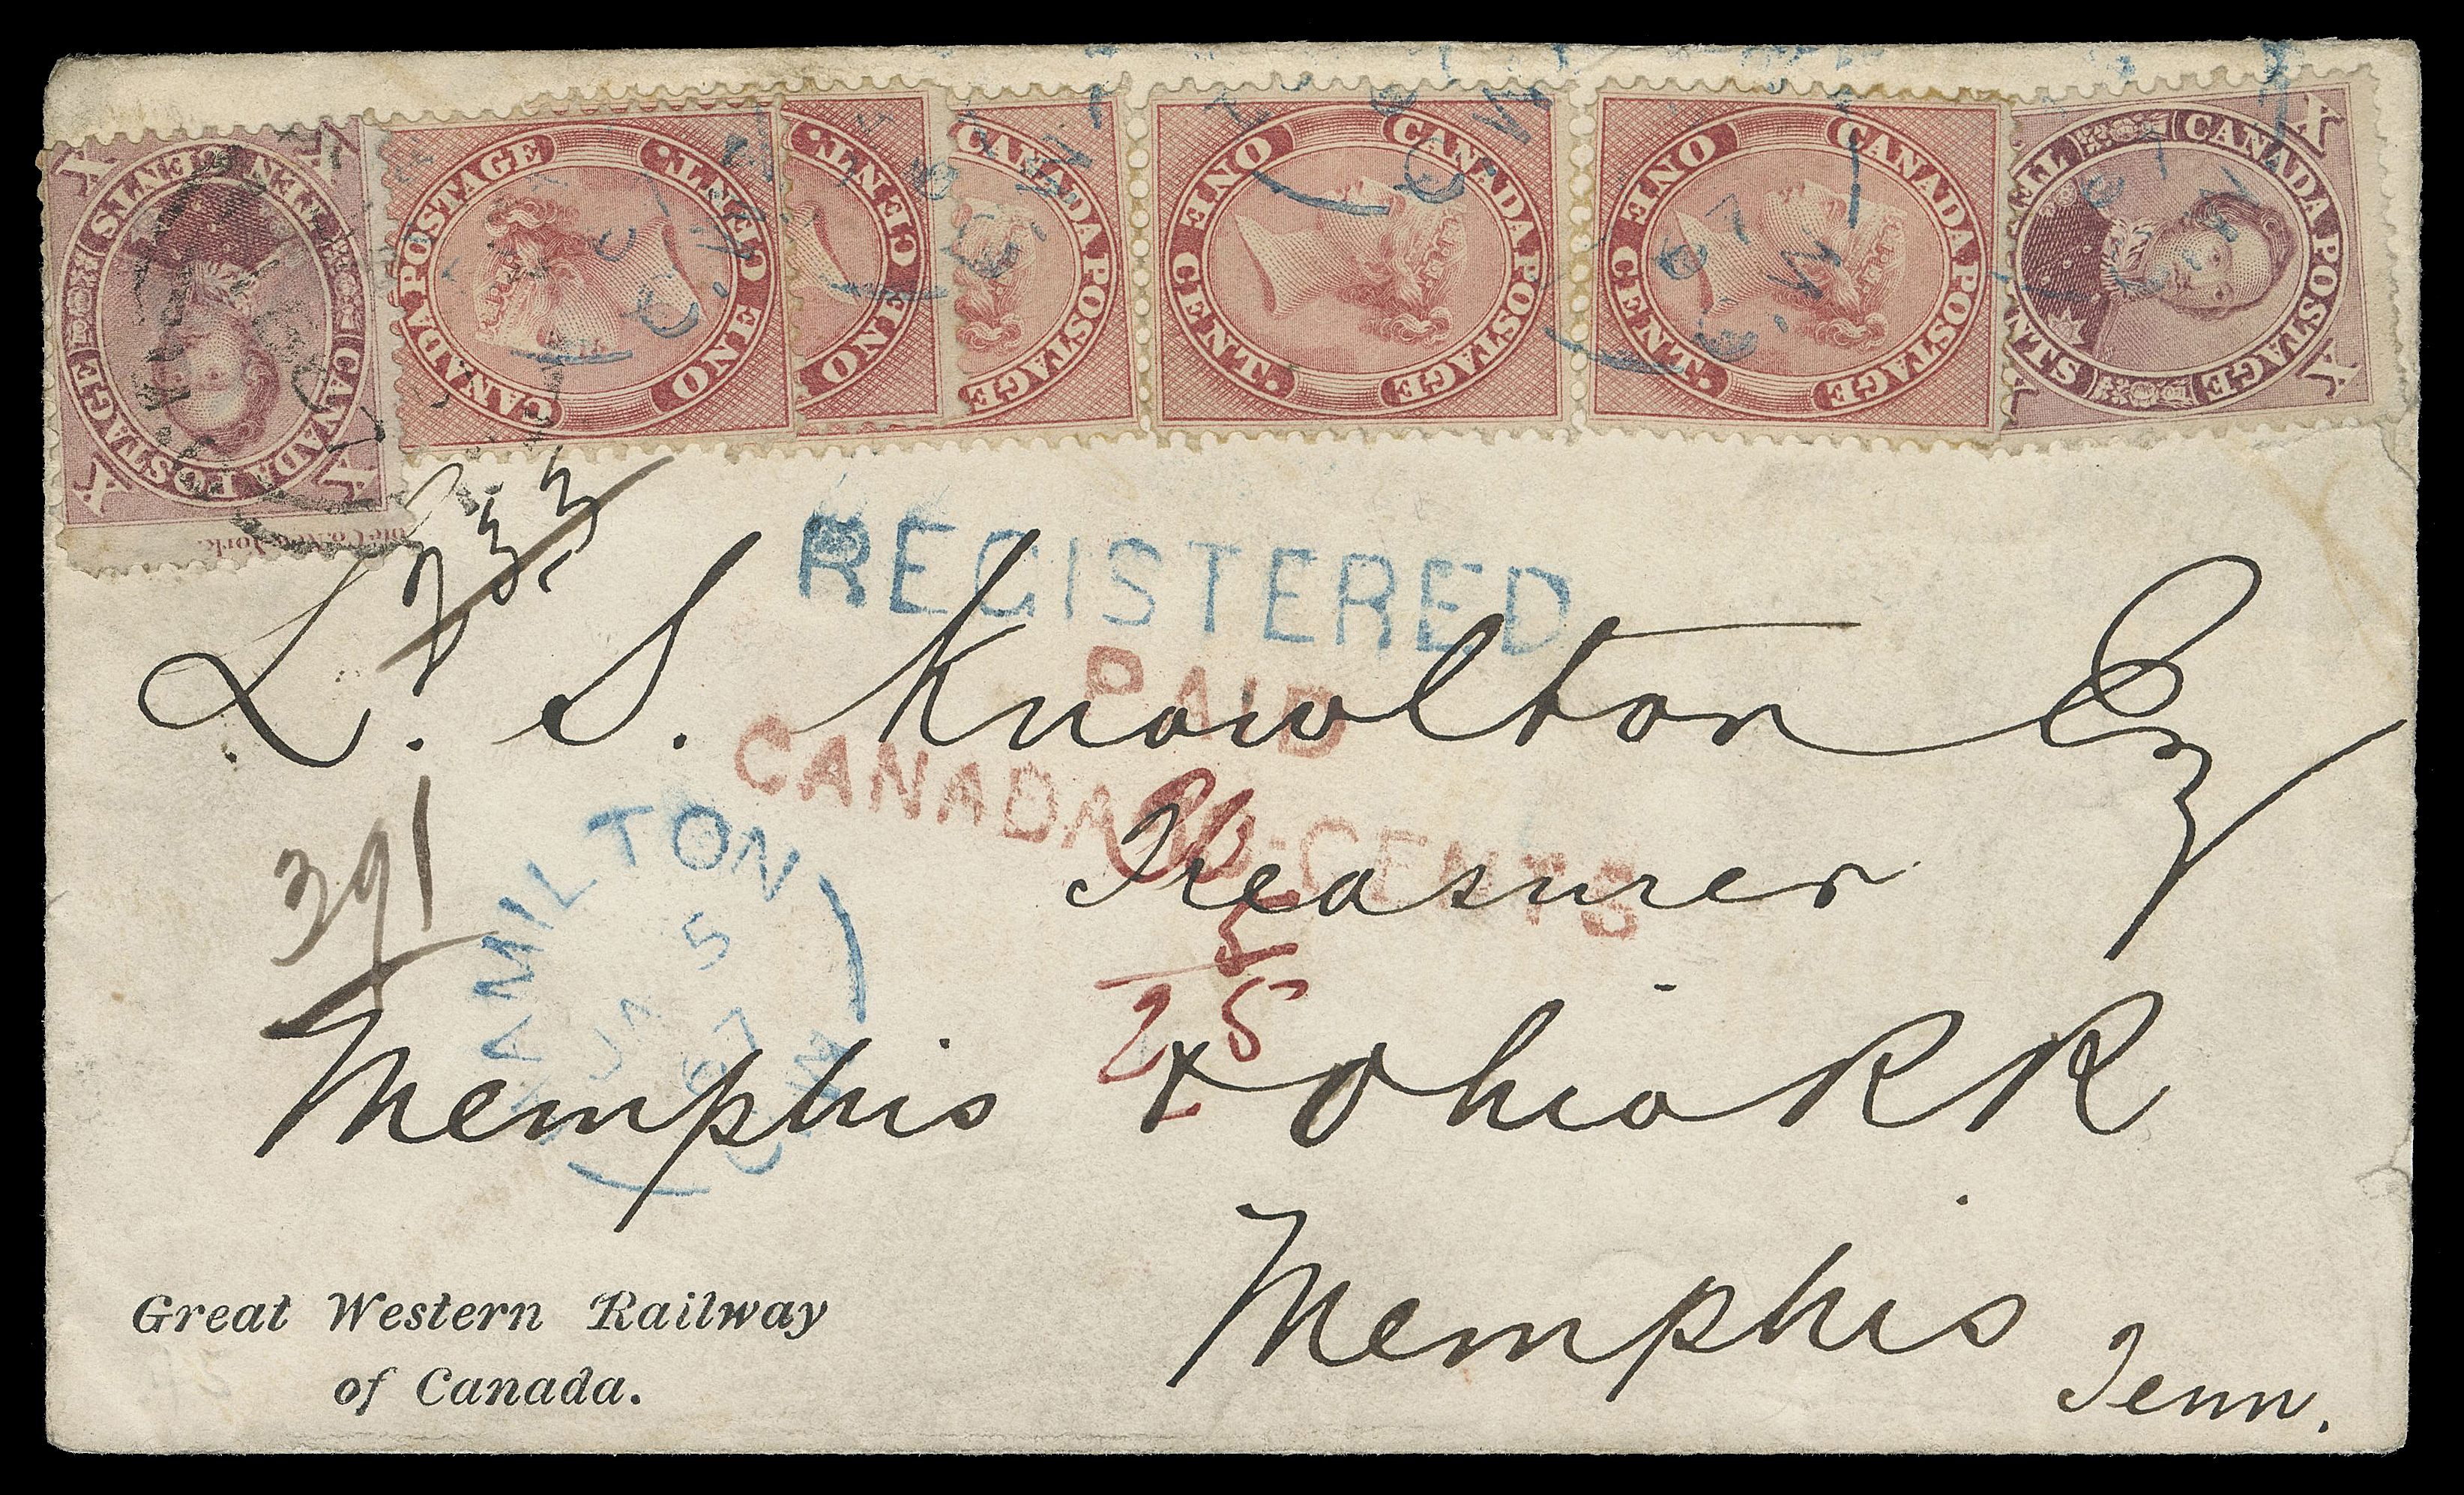 SIX PENCE AND TEN CENTS  1867 (January 5) Great Western Railway of Canada envelope sent registered from Hamilton to Memphis, Tennessee, displaying an outstanding franking with two 10c claret (PO 23), perf 12, left example showing portion of ABNC imprint and faint "String of Pearls" plate variety (Position 3) and five examples of the 1c rose, perf 12, three of which are overlapped, tied by Hamilton JA 5 double arc dispatch in black at top left and by Hamilton JA 5 67 split ring datestamps in blue, additional strike below with same-ink straightline REGISTERED, border exchange two-line PAID / CANADA 10 CENTS with "10" digit modified as "20" in manuscript, plus "5 / 25" below, light Windsor JA 7 transit backstamp; envelope with tears, one of which shows on the front near right 10c, couple stamps with minor perf flaws. An impressive double registered weight letter to the United States - A UNIQUE FRANKING to the US according to the Firby census, F-VF (Unitrade 14, 17, 17iv)

Census: This is cover No. 5 listed in Arfken & Leggett "Canada